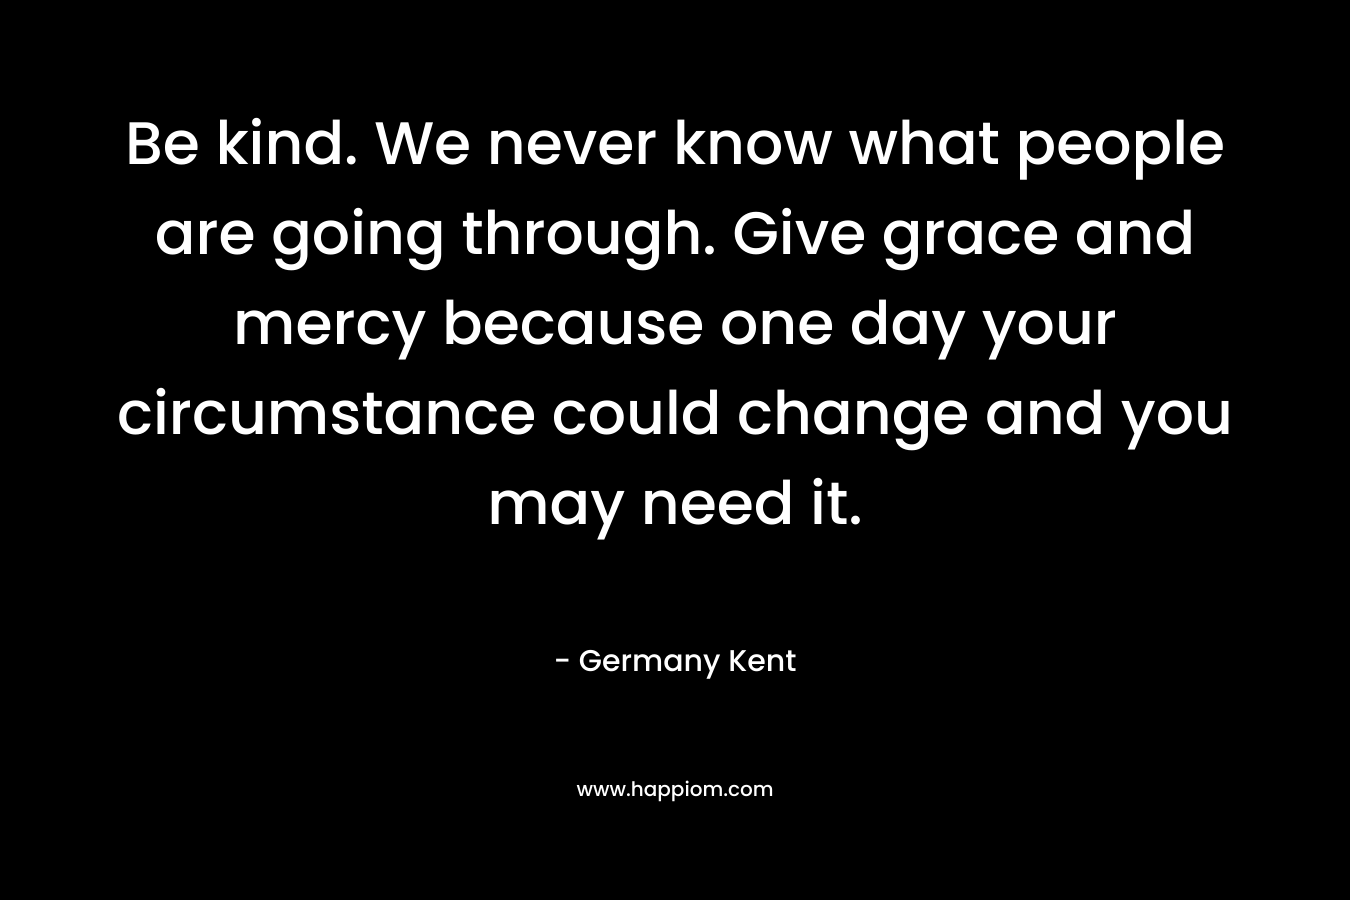 Be kind. We never know what people are going through. Give grace and mercy because one day your circumstance could change and you may need it.